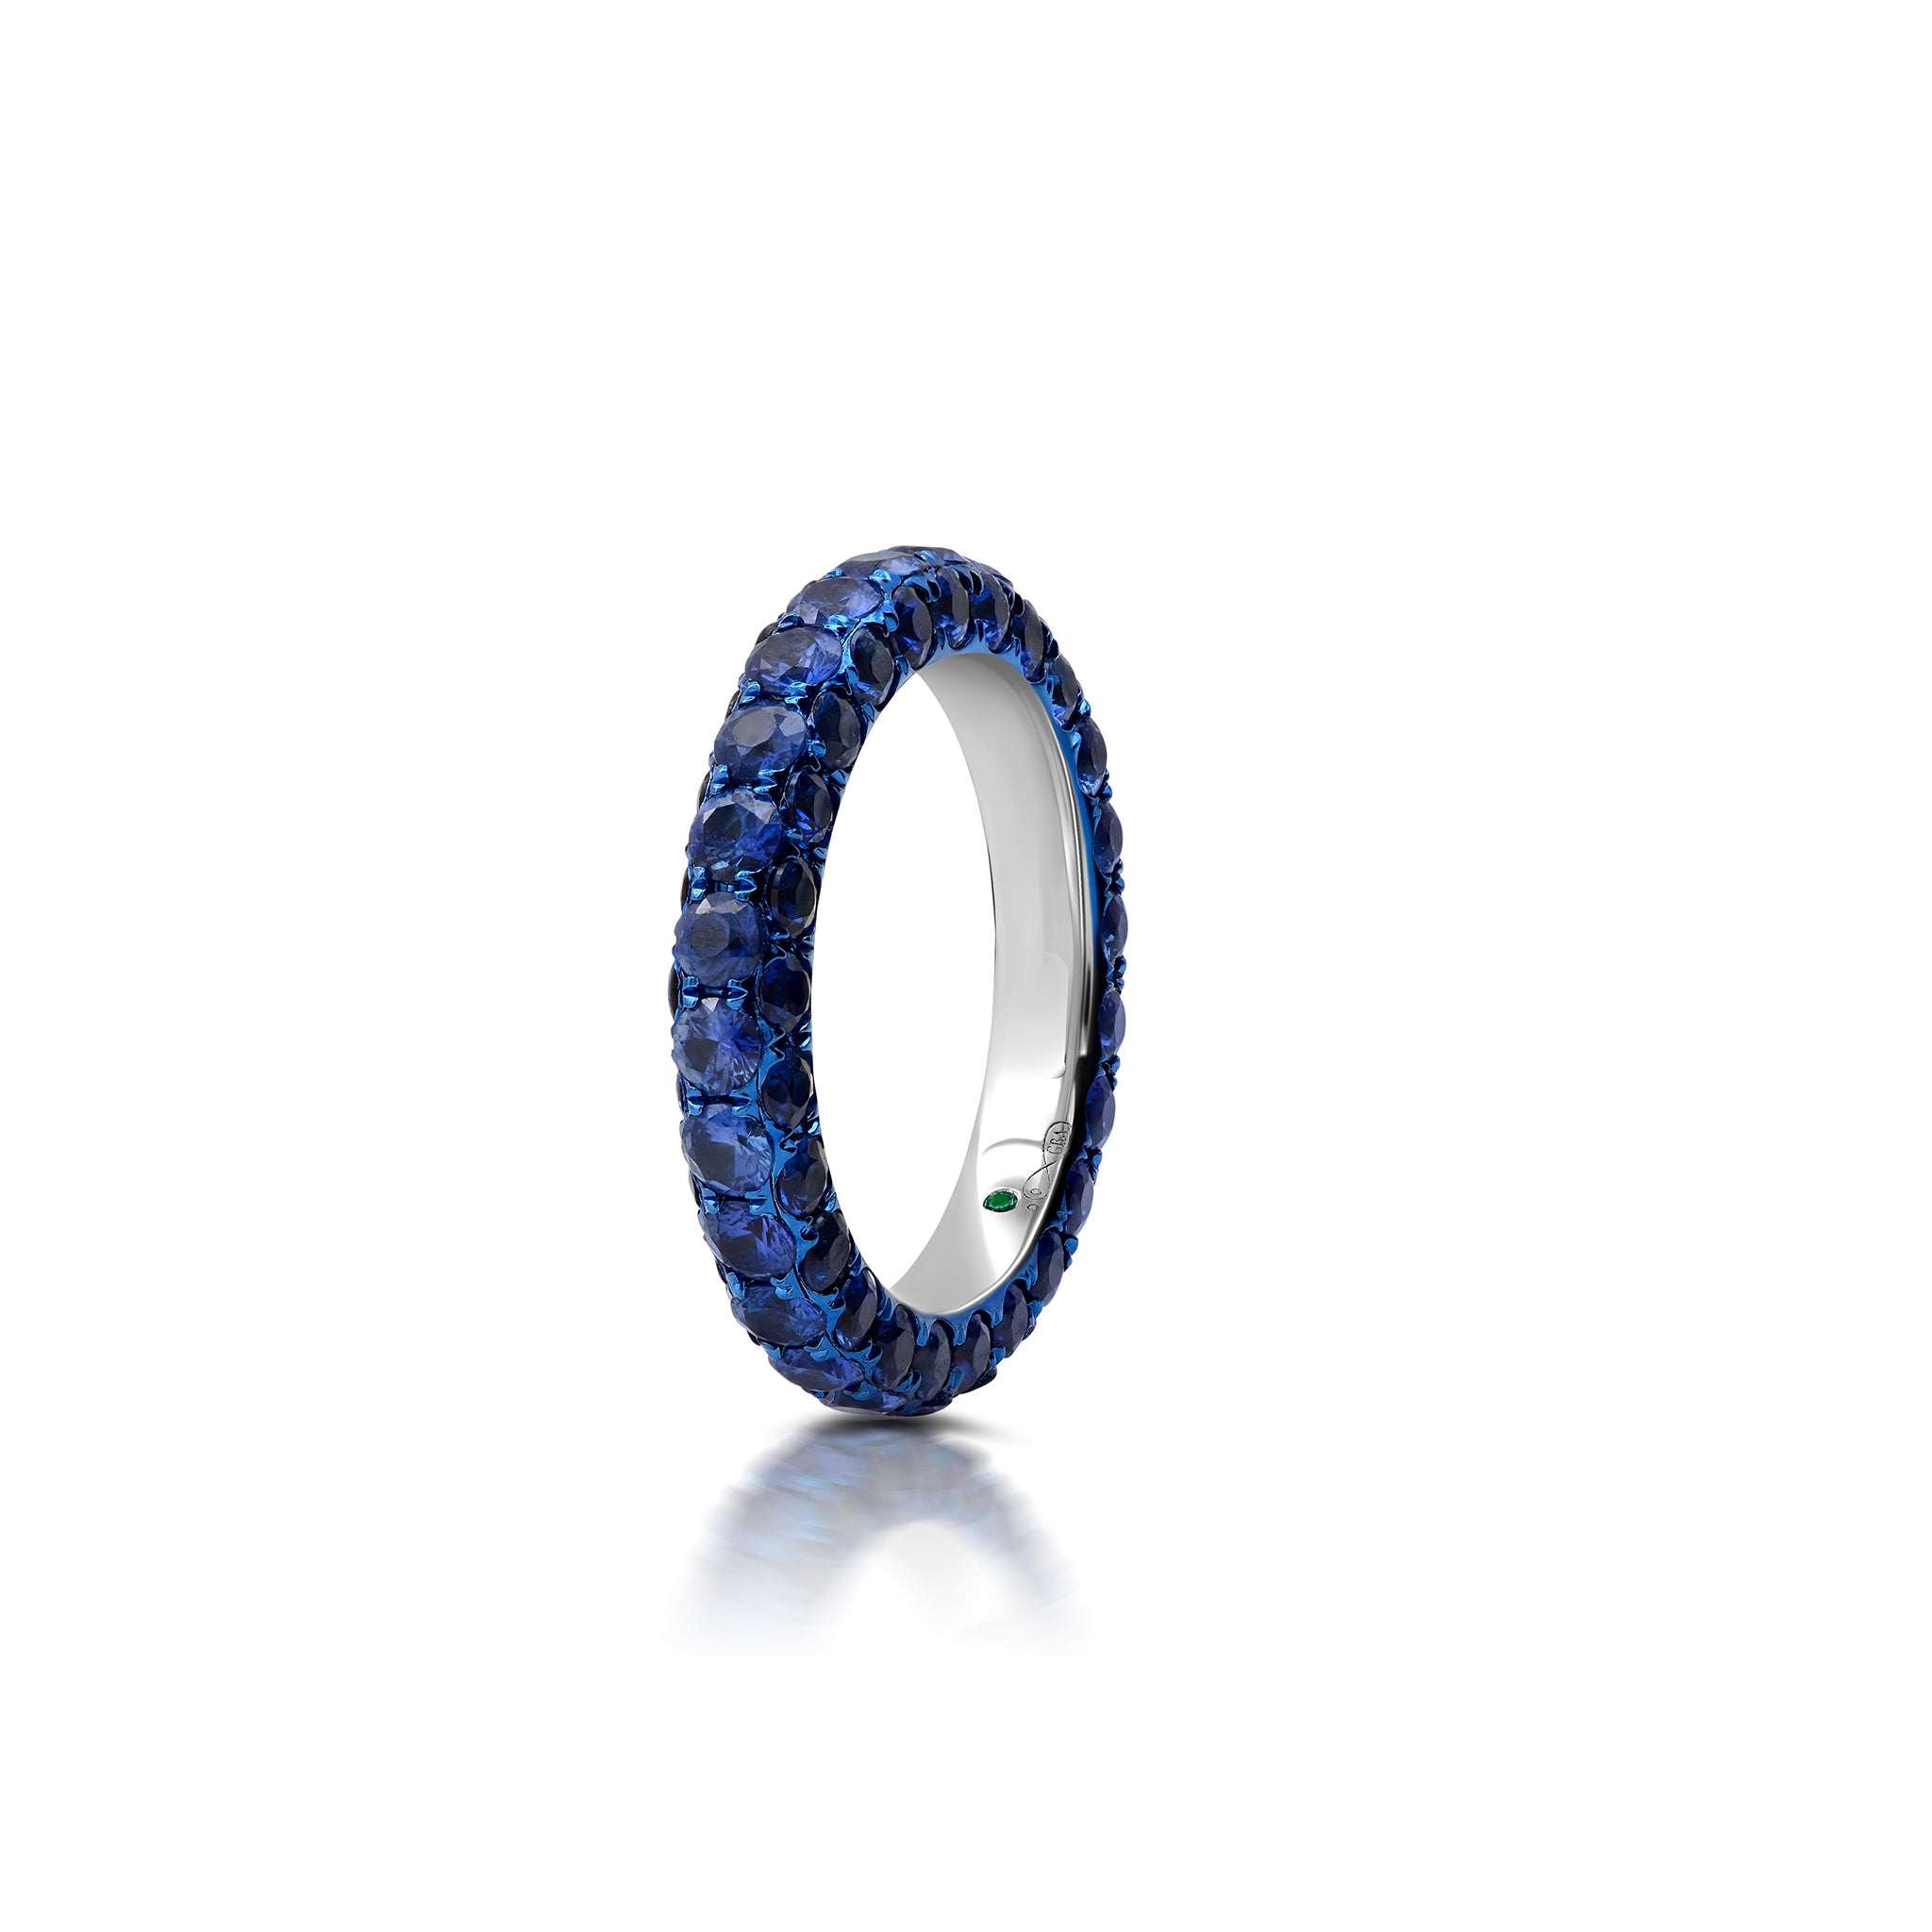 Blue Rhodium Blue Sapphire 3 Sided Band Ring